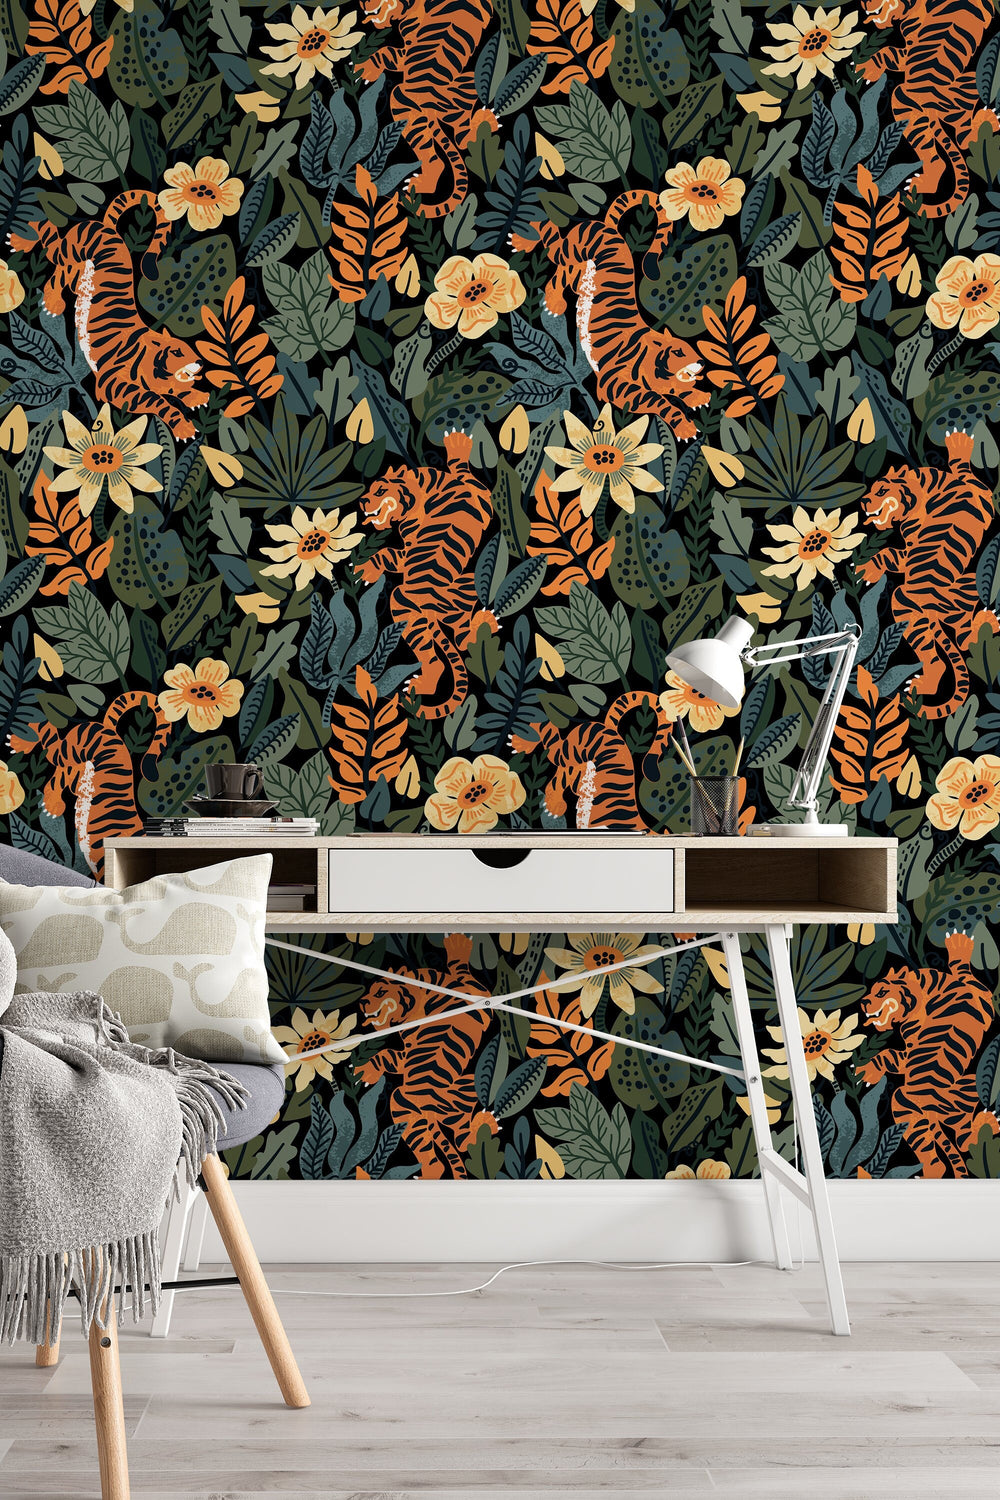 Tiger in the Woods Wallcovering - Fabric Peel & Stick Wallpaper - Removable Self Adhesive Wallpaper Roll pattern wallpaper design#3095